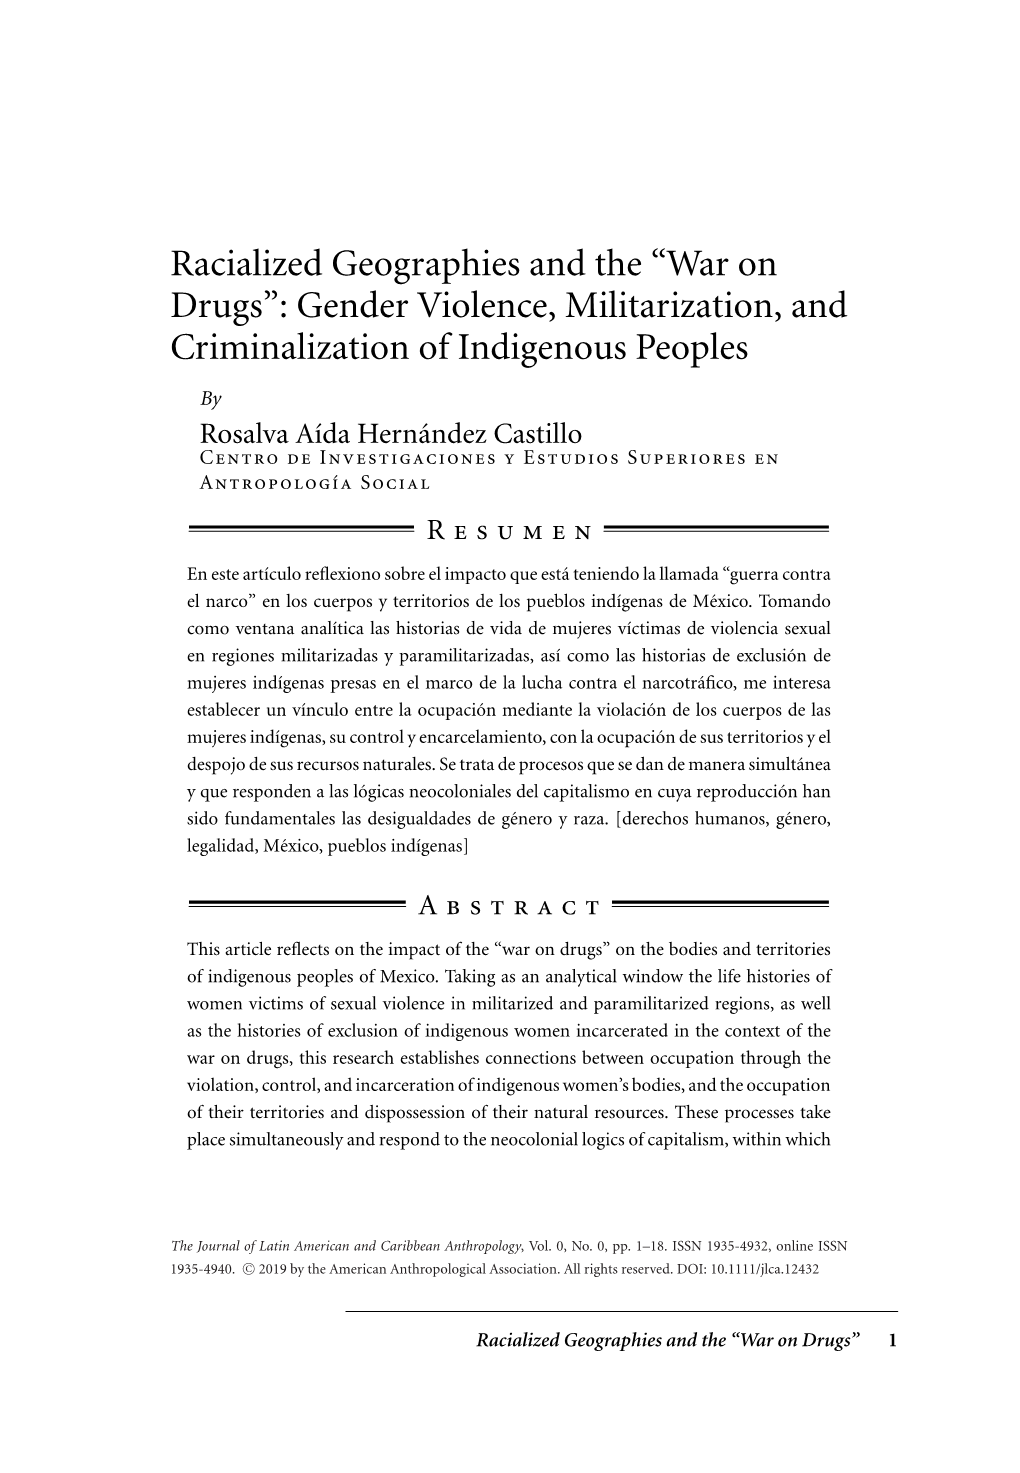 Racialized Geographies and the “War on Drugs”: Gender Violence, Militarization, and Criminalization of Indigenous Peoples